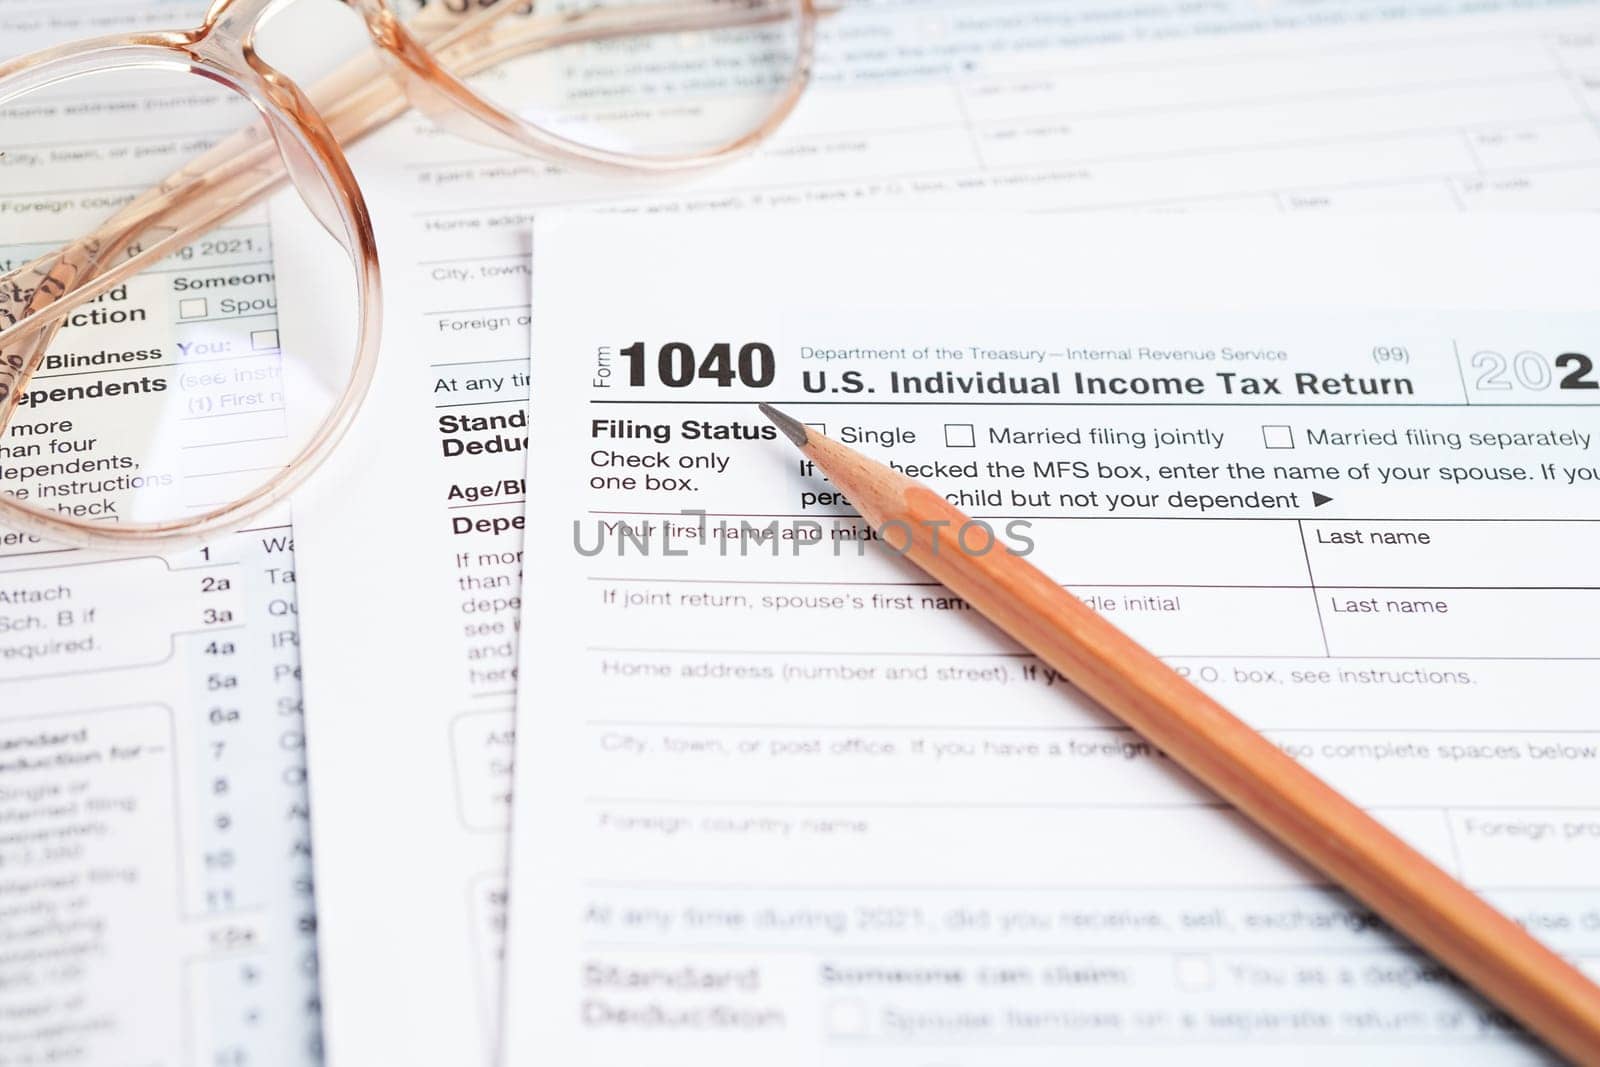 Tax form 1040 U.S. Individual Income Tax Return, business finance concept. by sweettomato